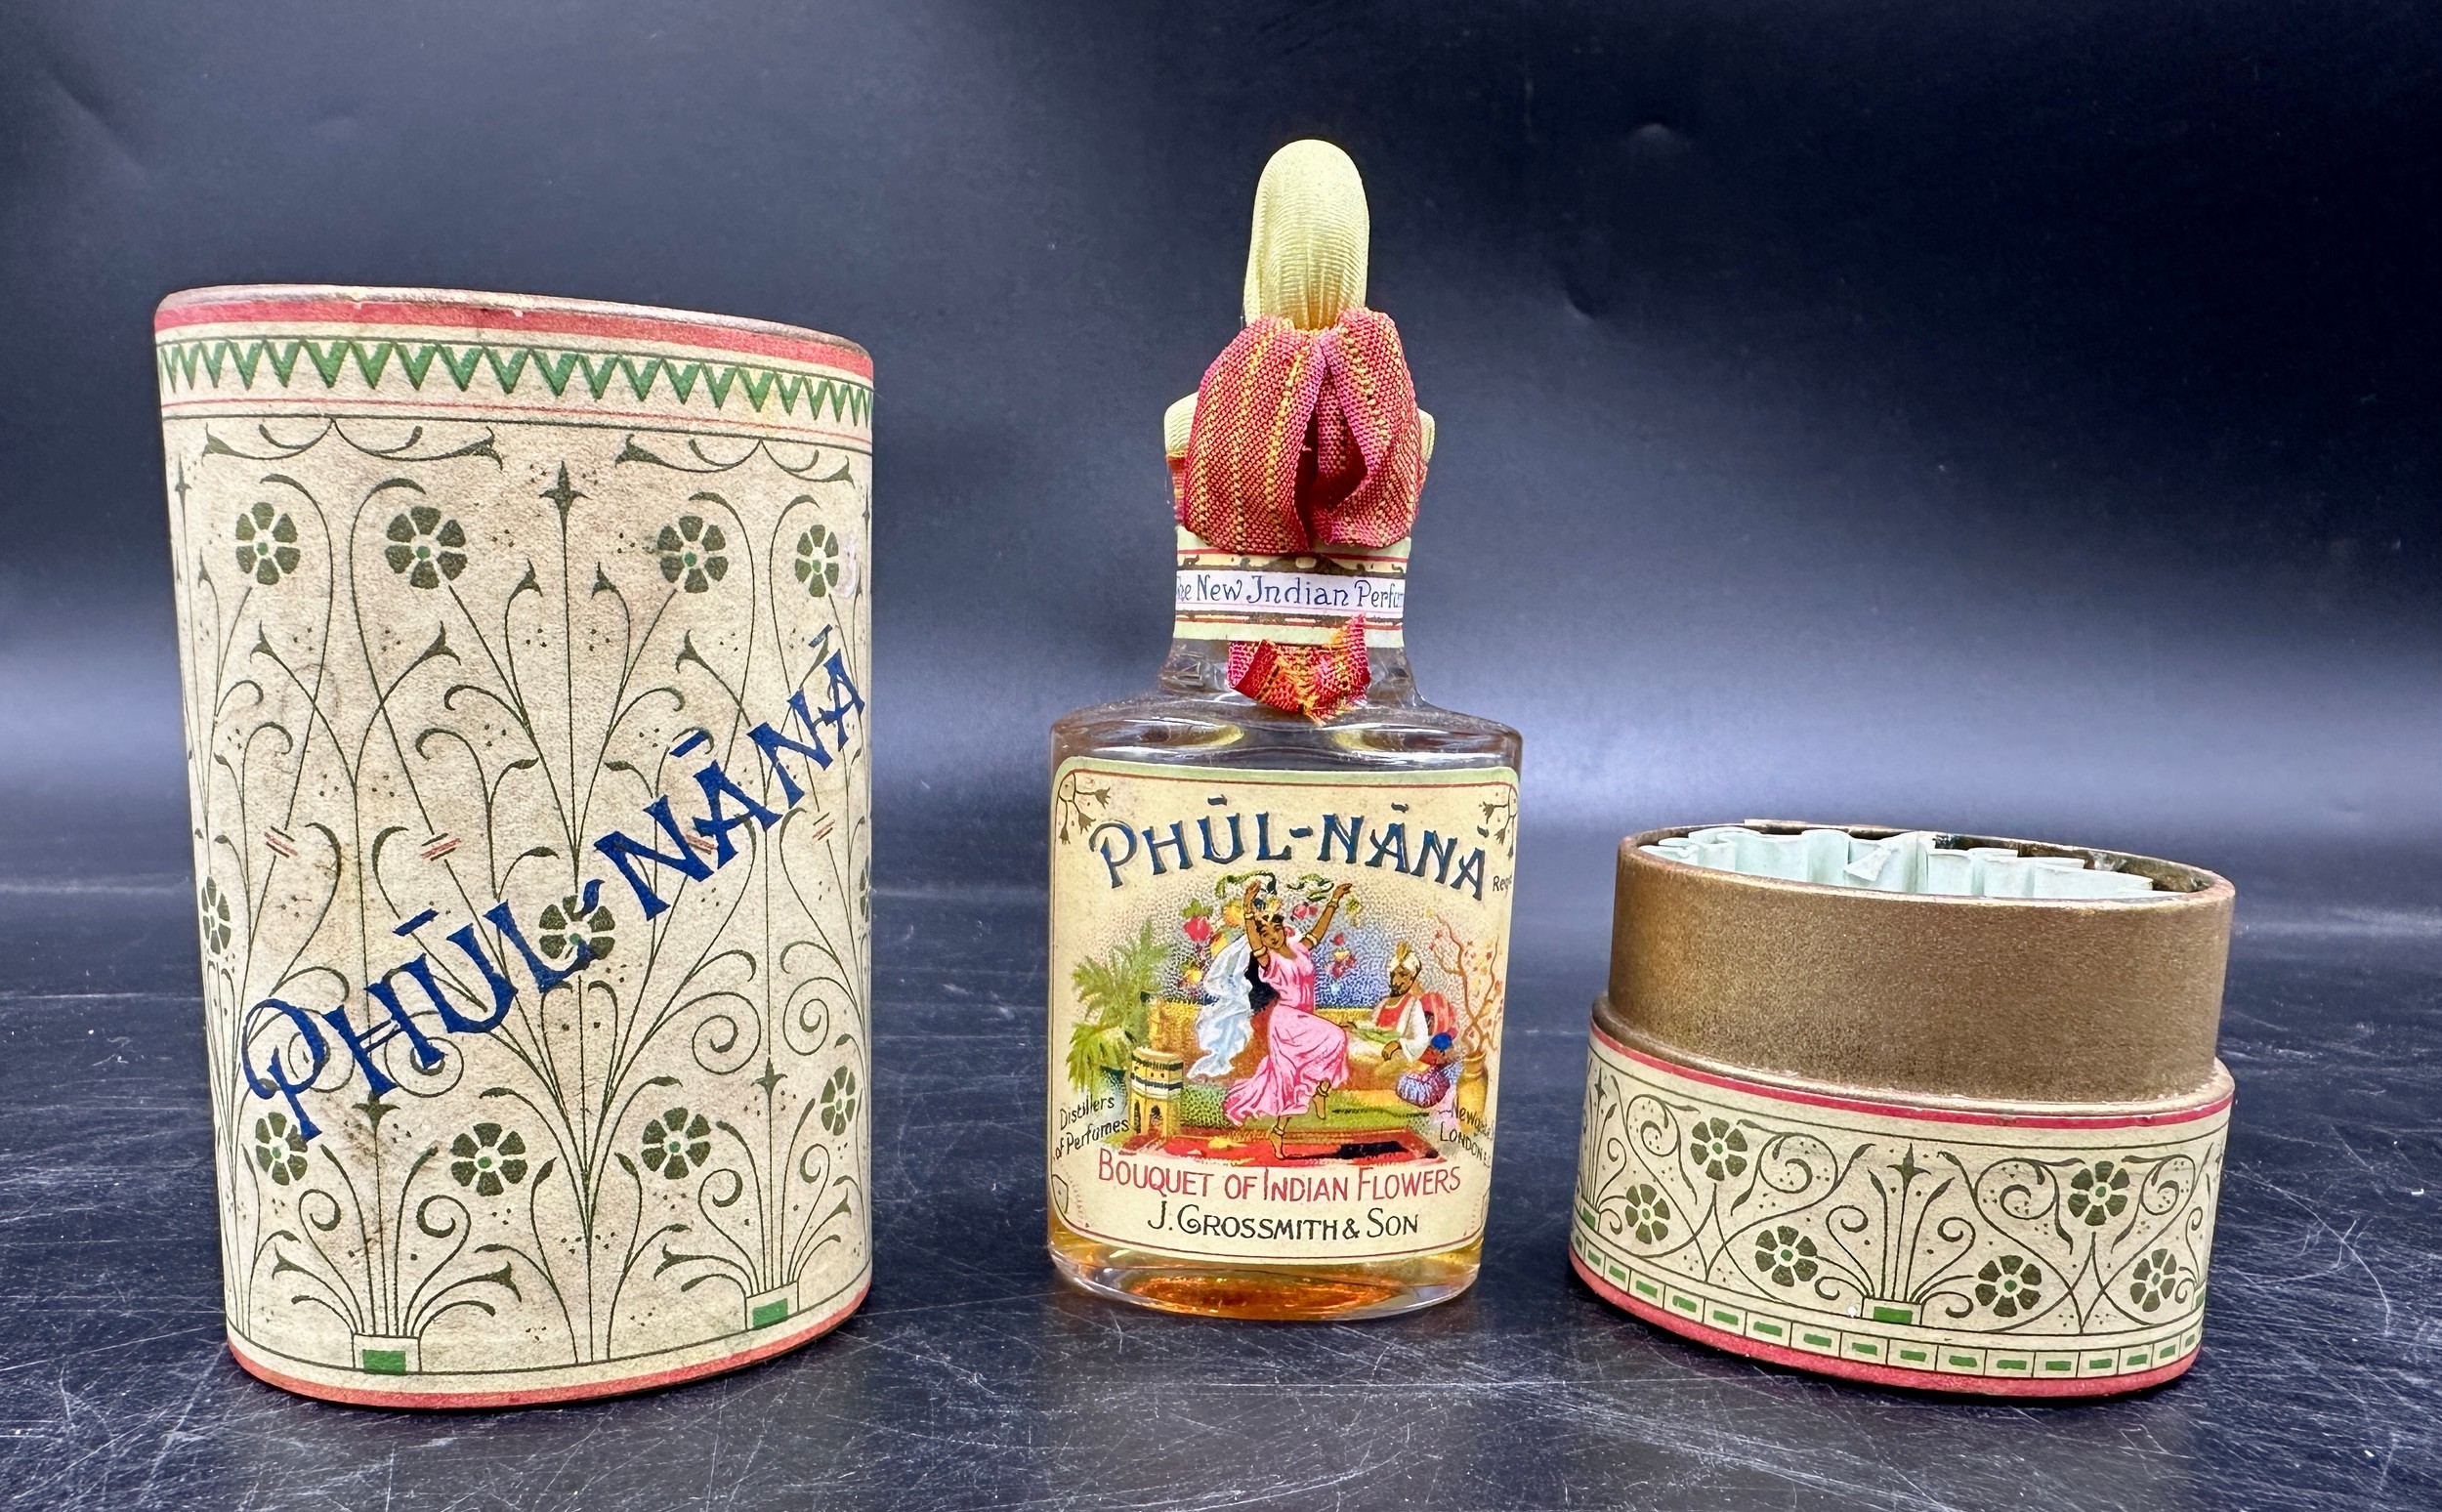 A sealed Phul-Nana 'Bouquet of Indian Flowers' perfume bottle by J. Grossmith & Son in original